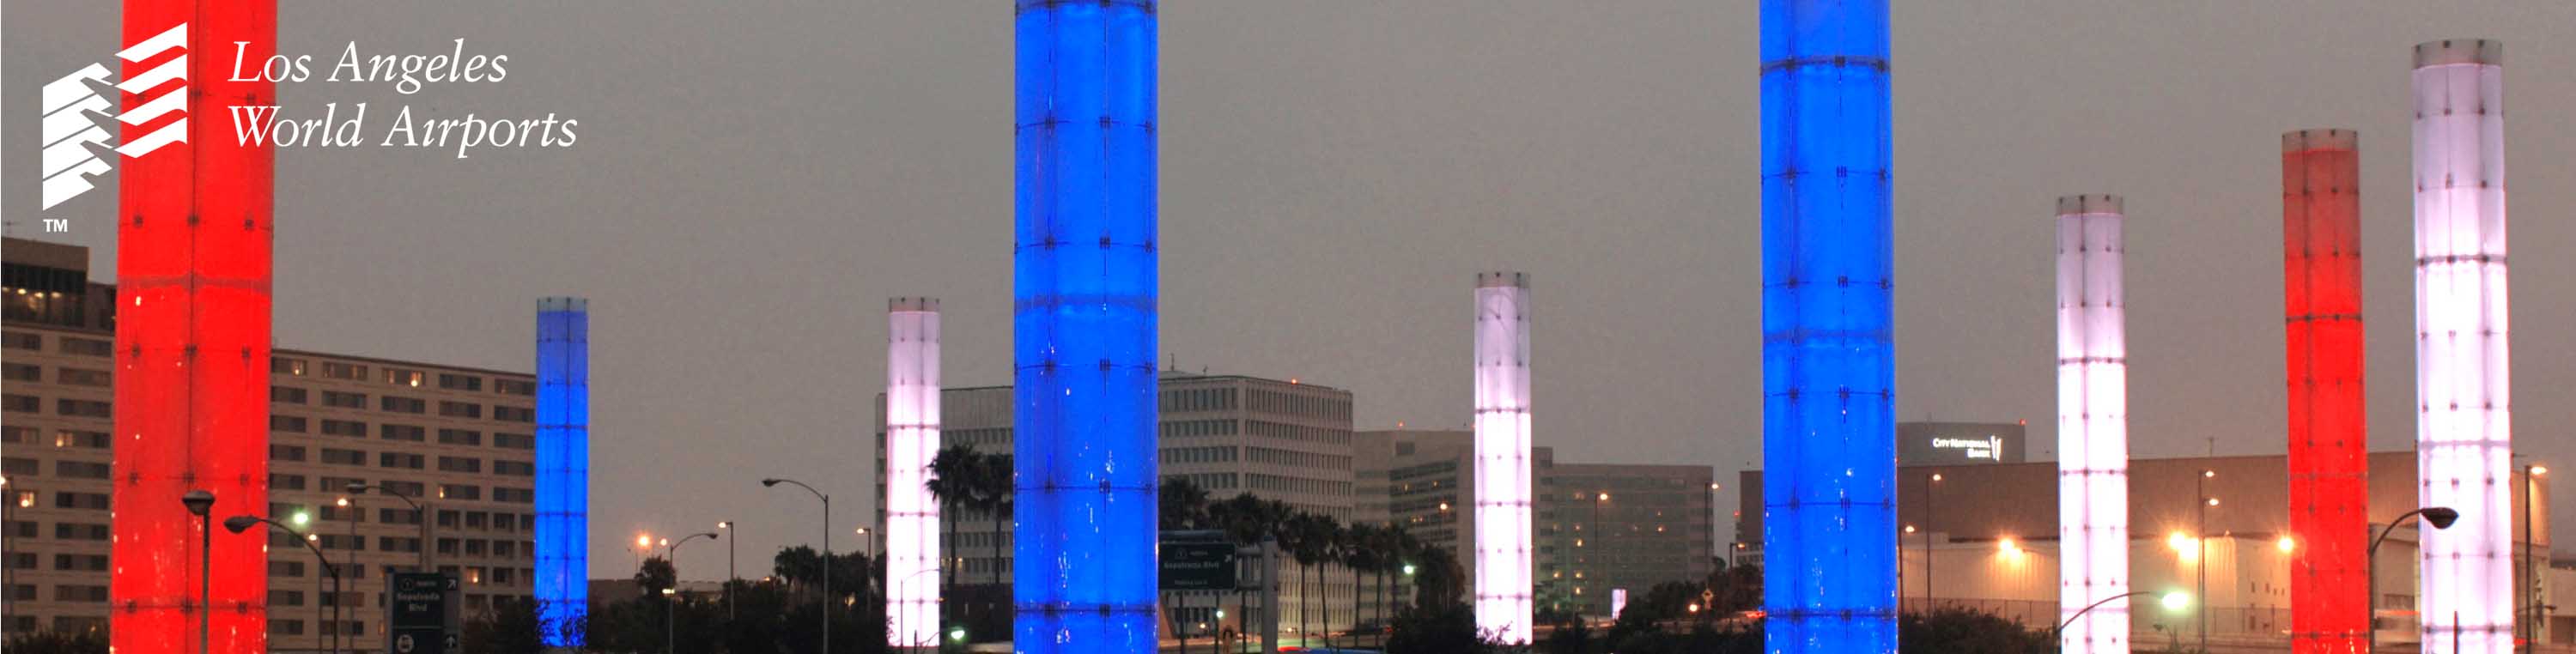 Header graphics - LAX Pylons in red, white and blue